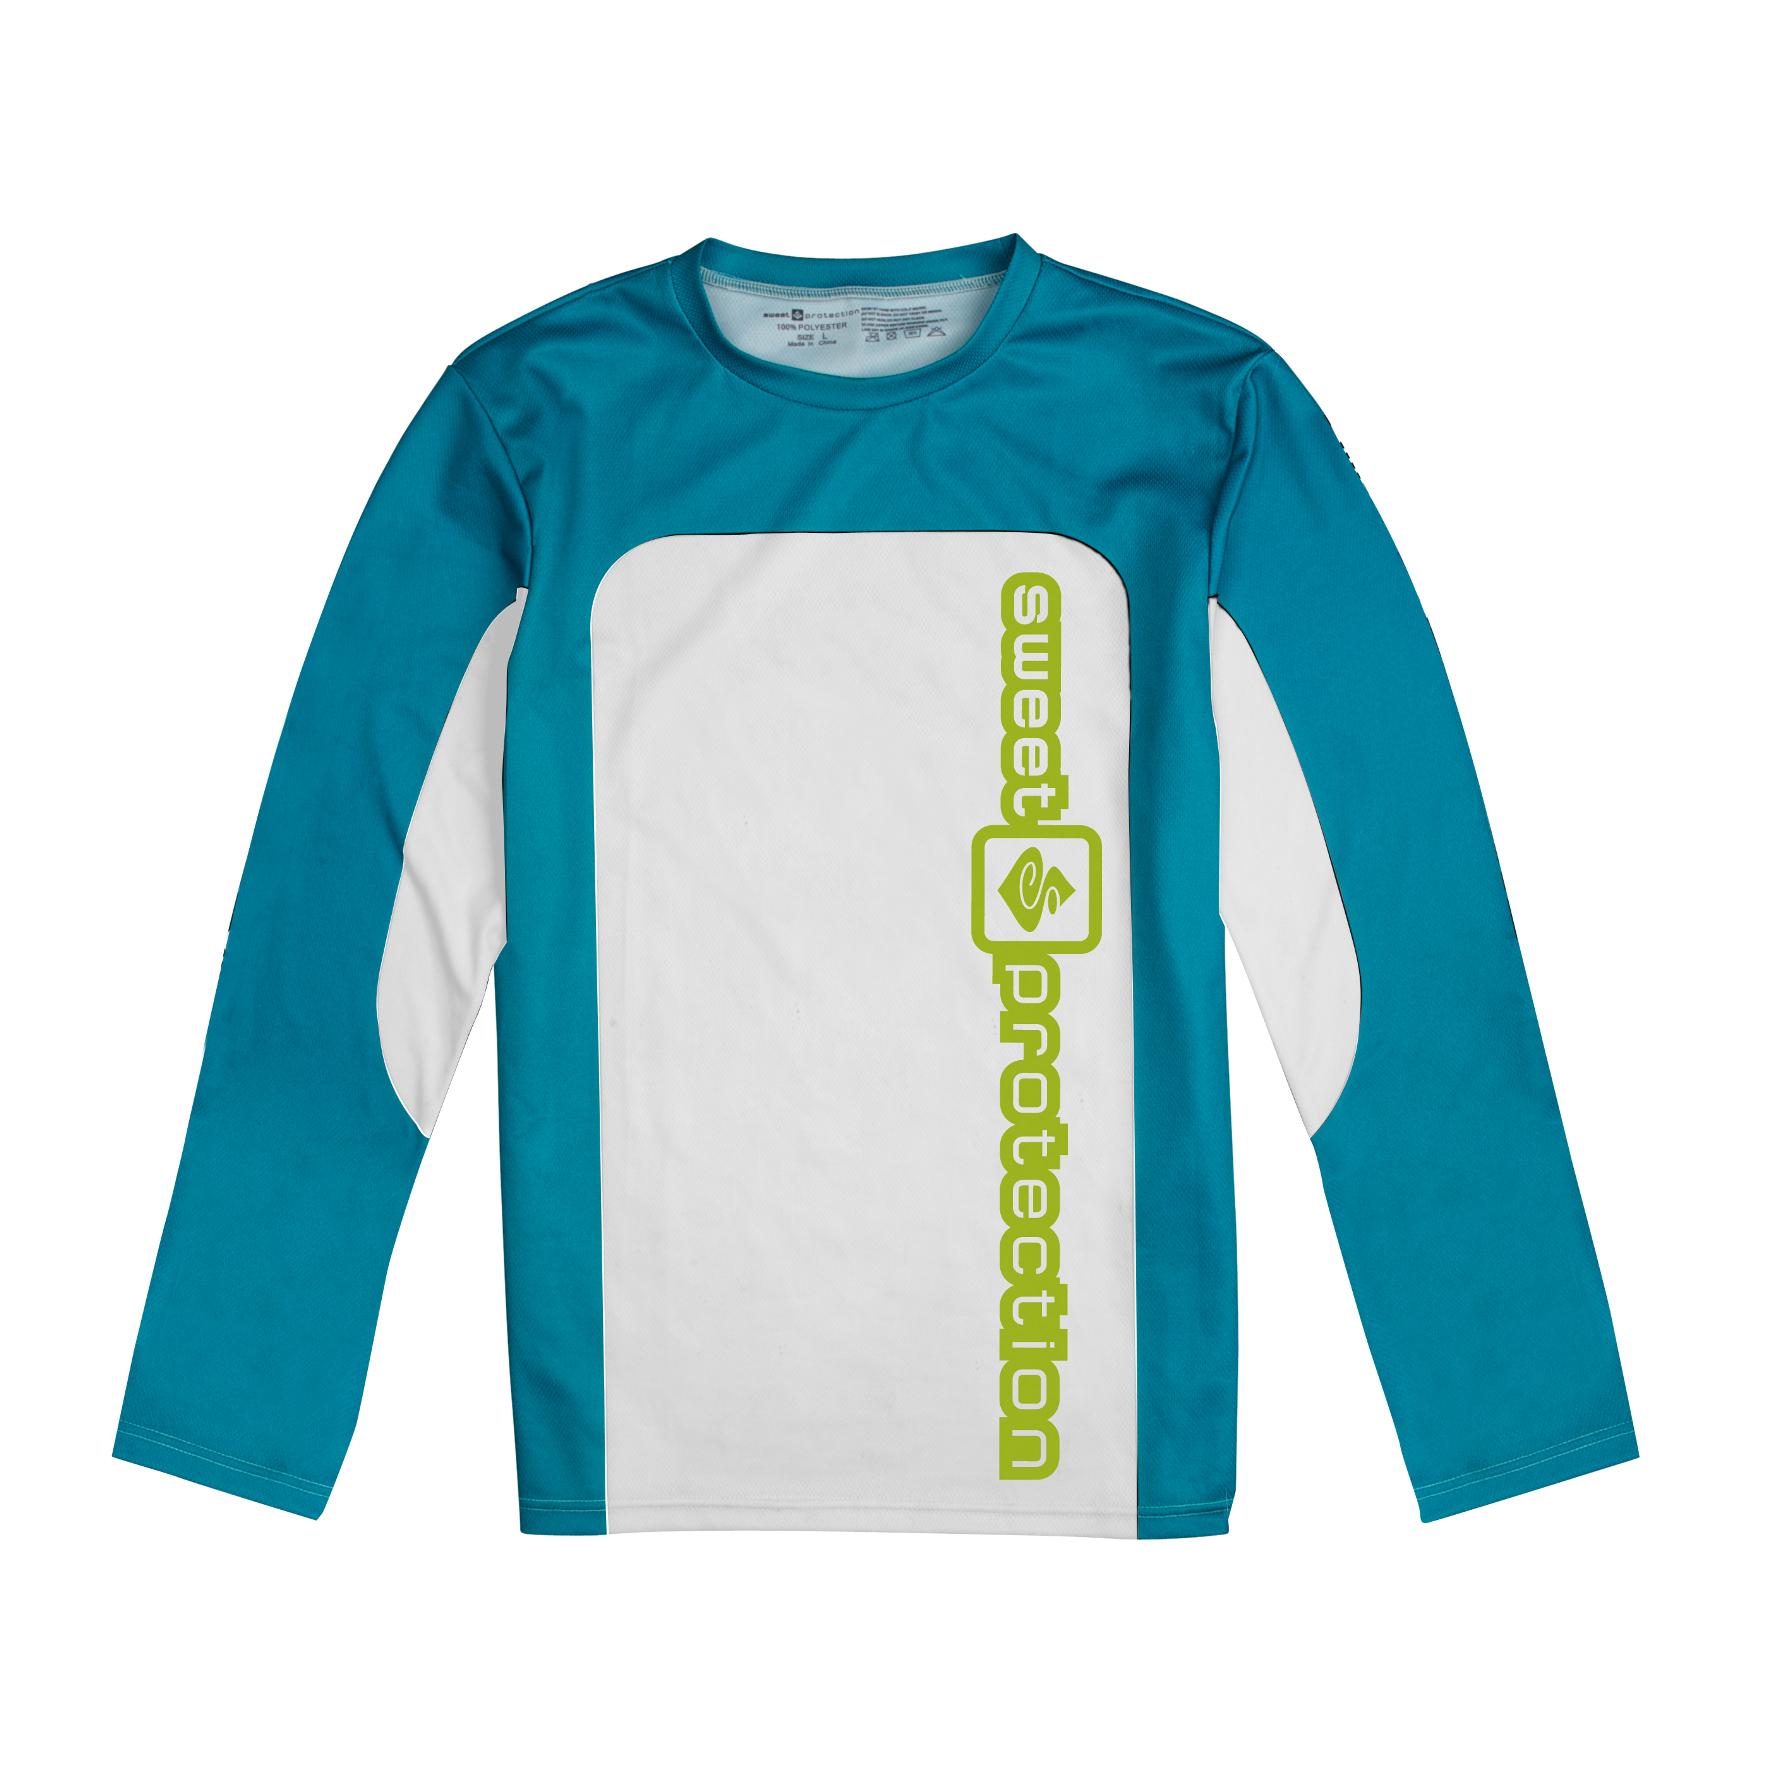 Foto Sweet Protection Mudride Jersey Downhill Hombre thunder blue/sno, l foto 364721